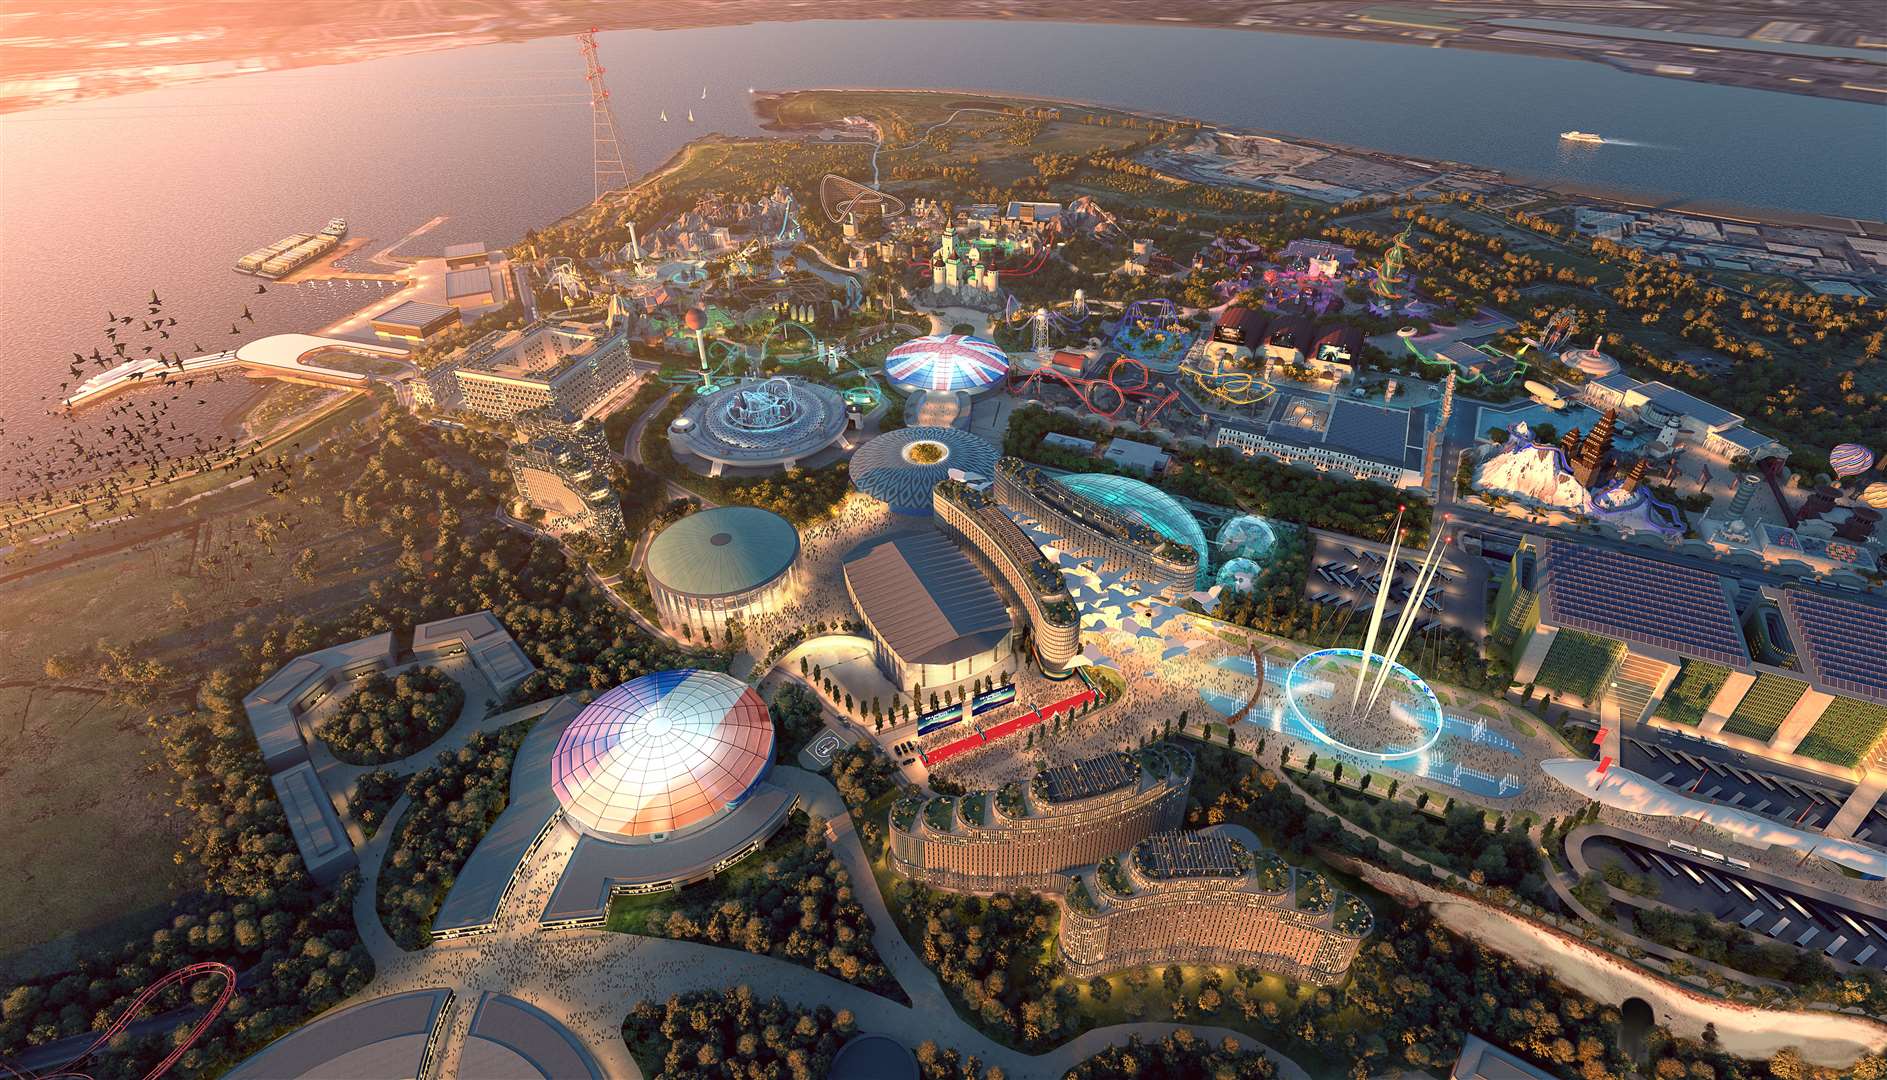 A detailed impression of what the London Resort theme park would look like